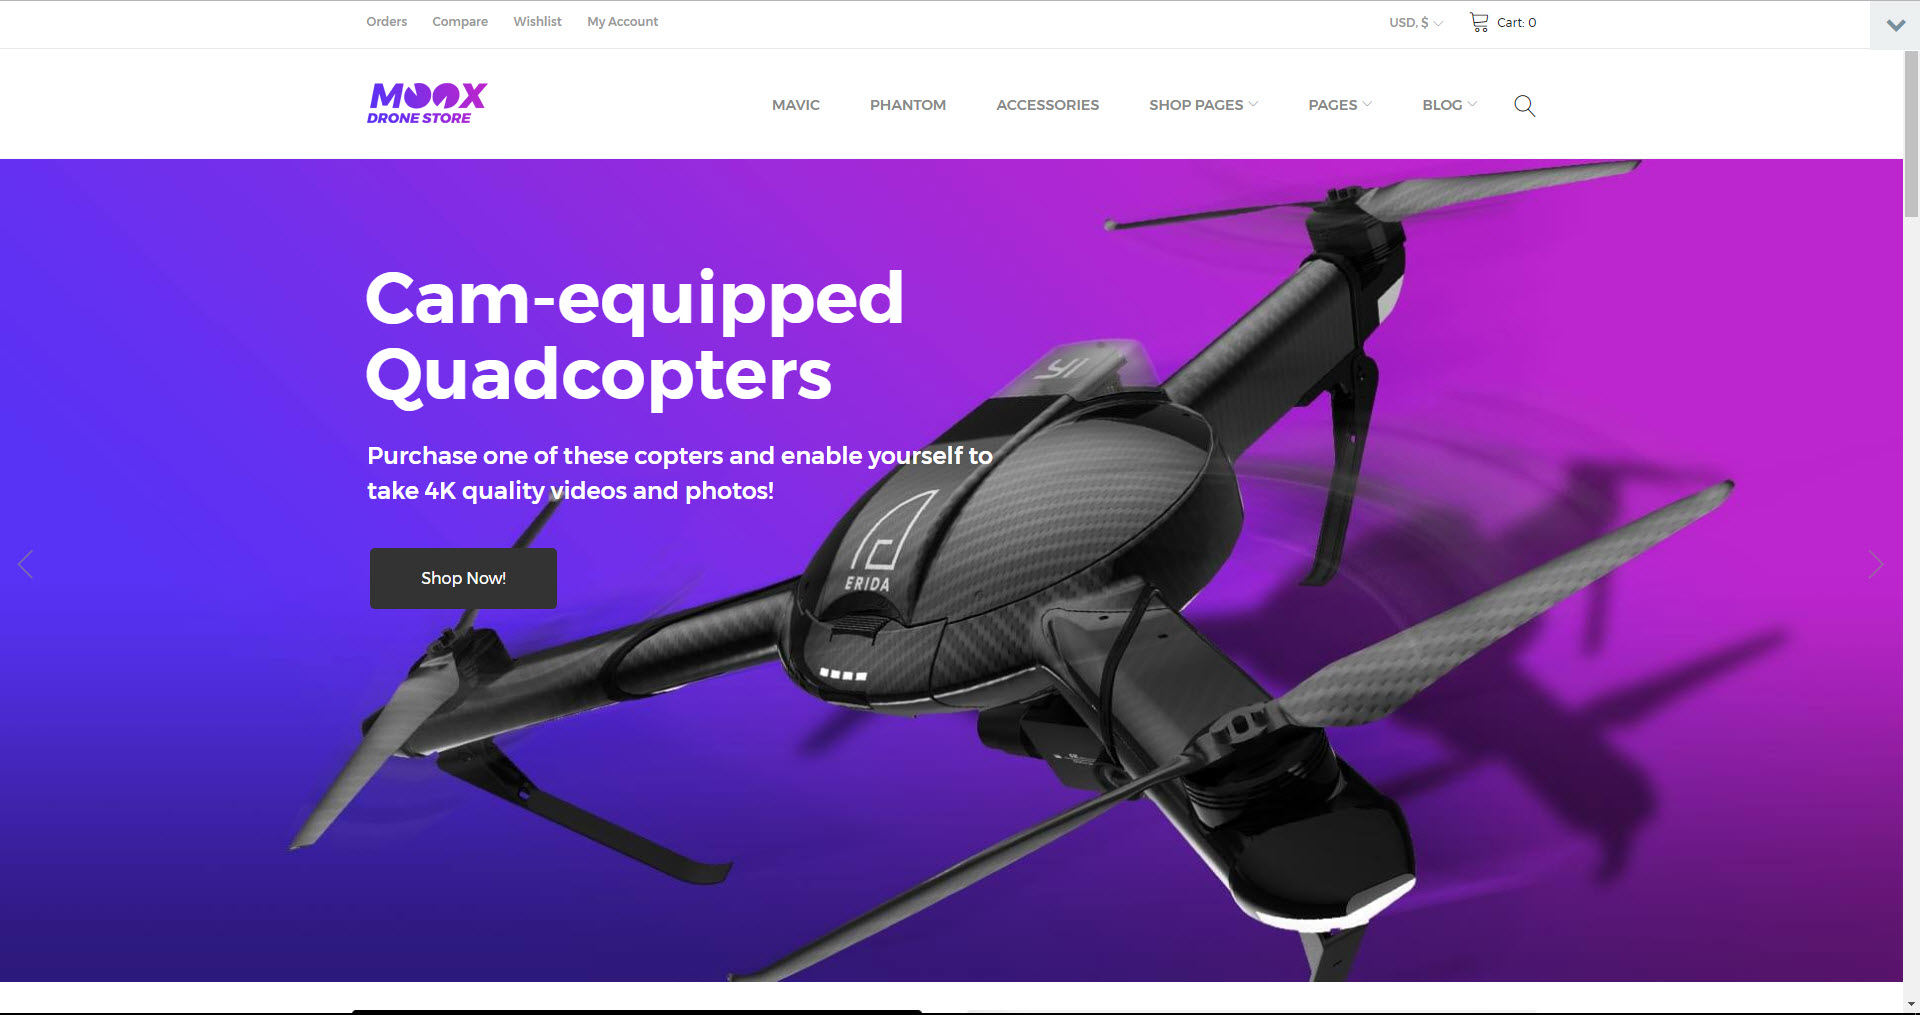 Drone Dropshipping Store | Readymade Website | Potential Earning: 6000$/month